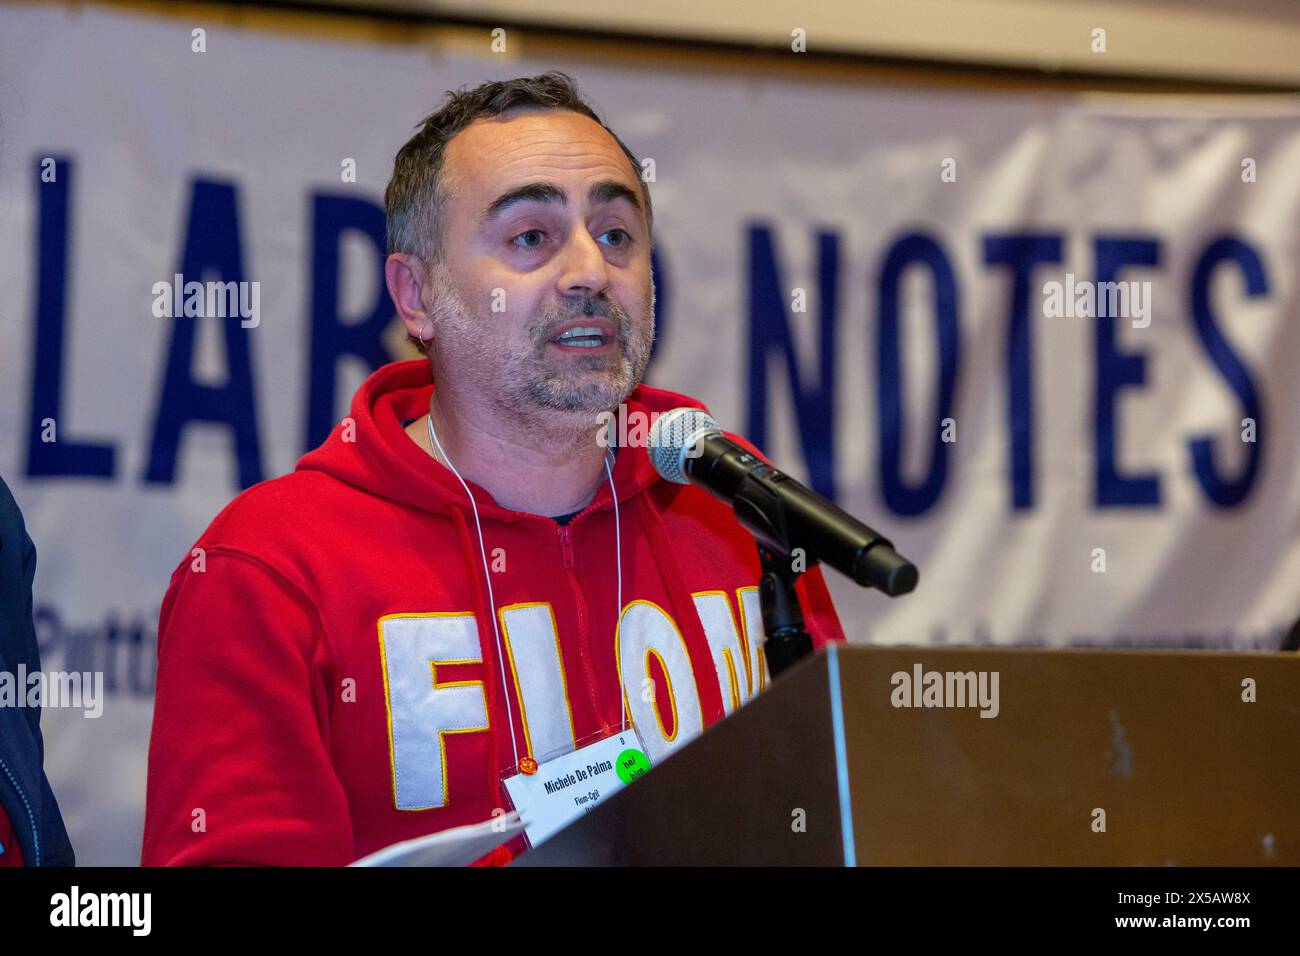 Chicago, Illinois - Michele De Palma, general secretary of the Italian metalworkers union., speaks at the 2024 Labor Notes conference. The conference Stock Photo